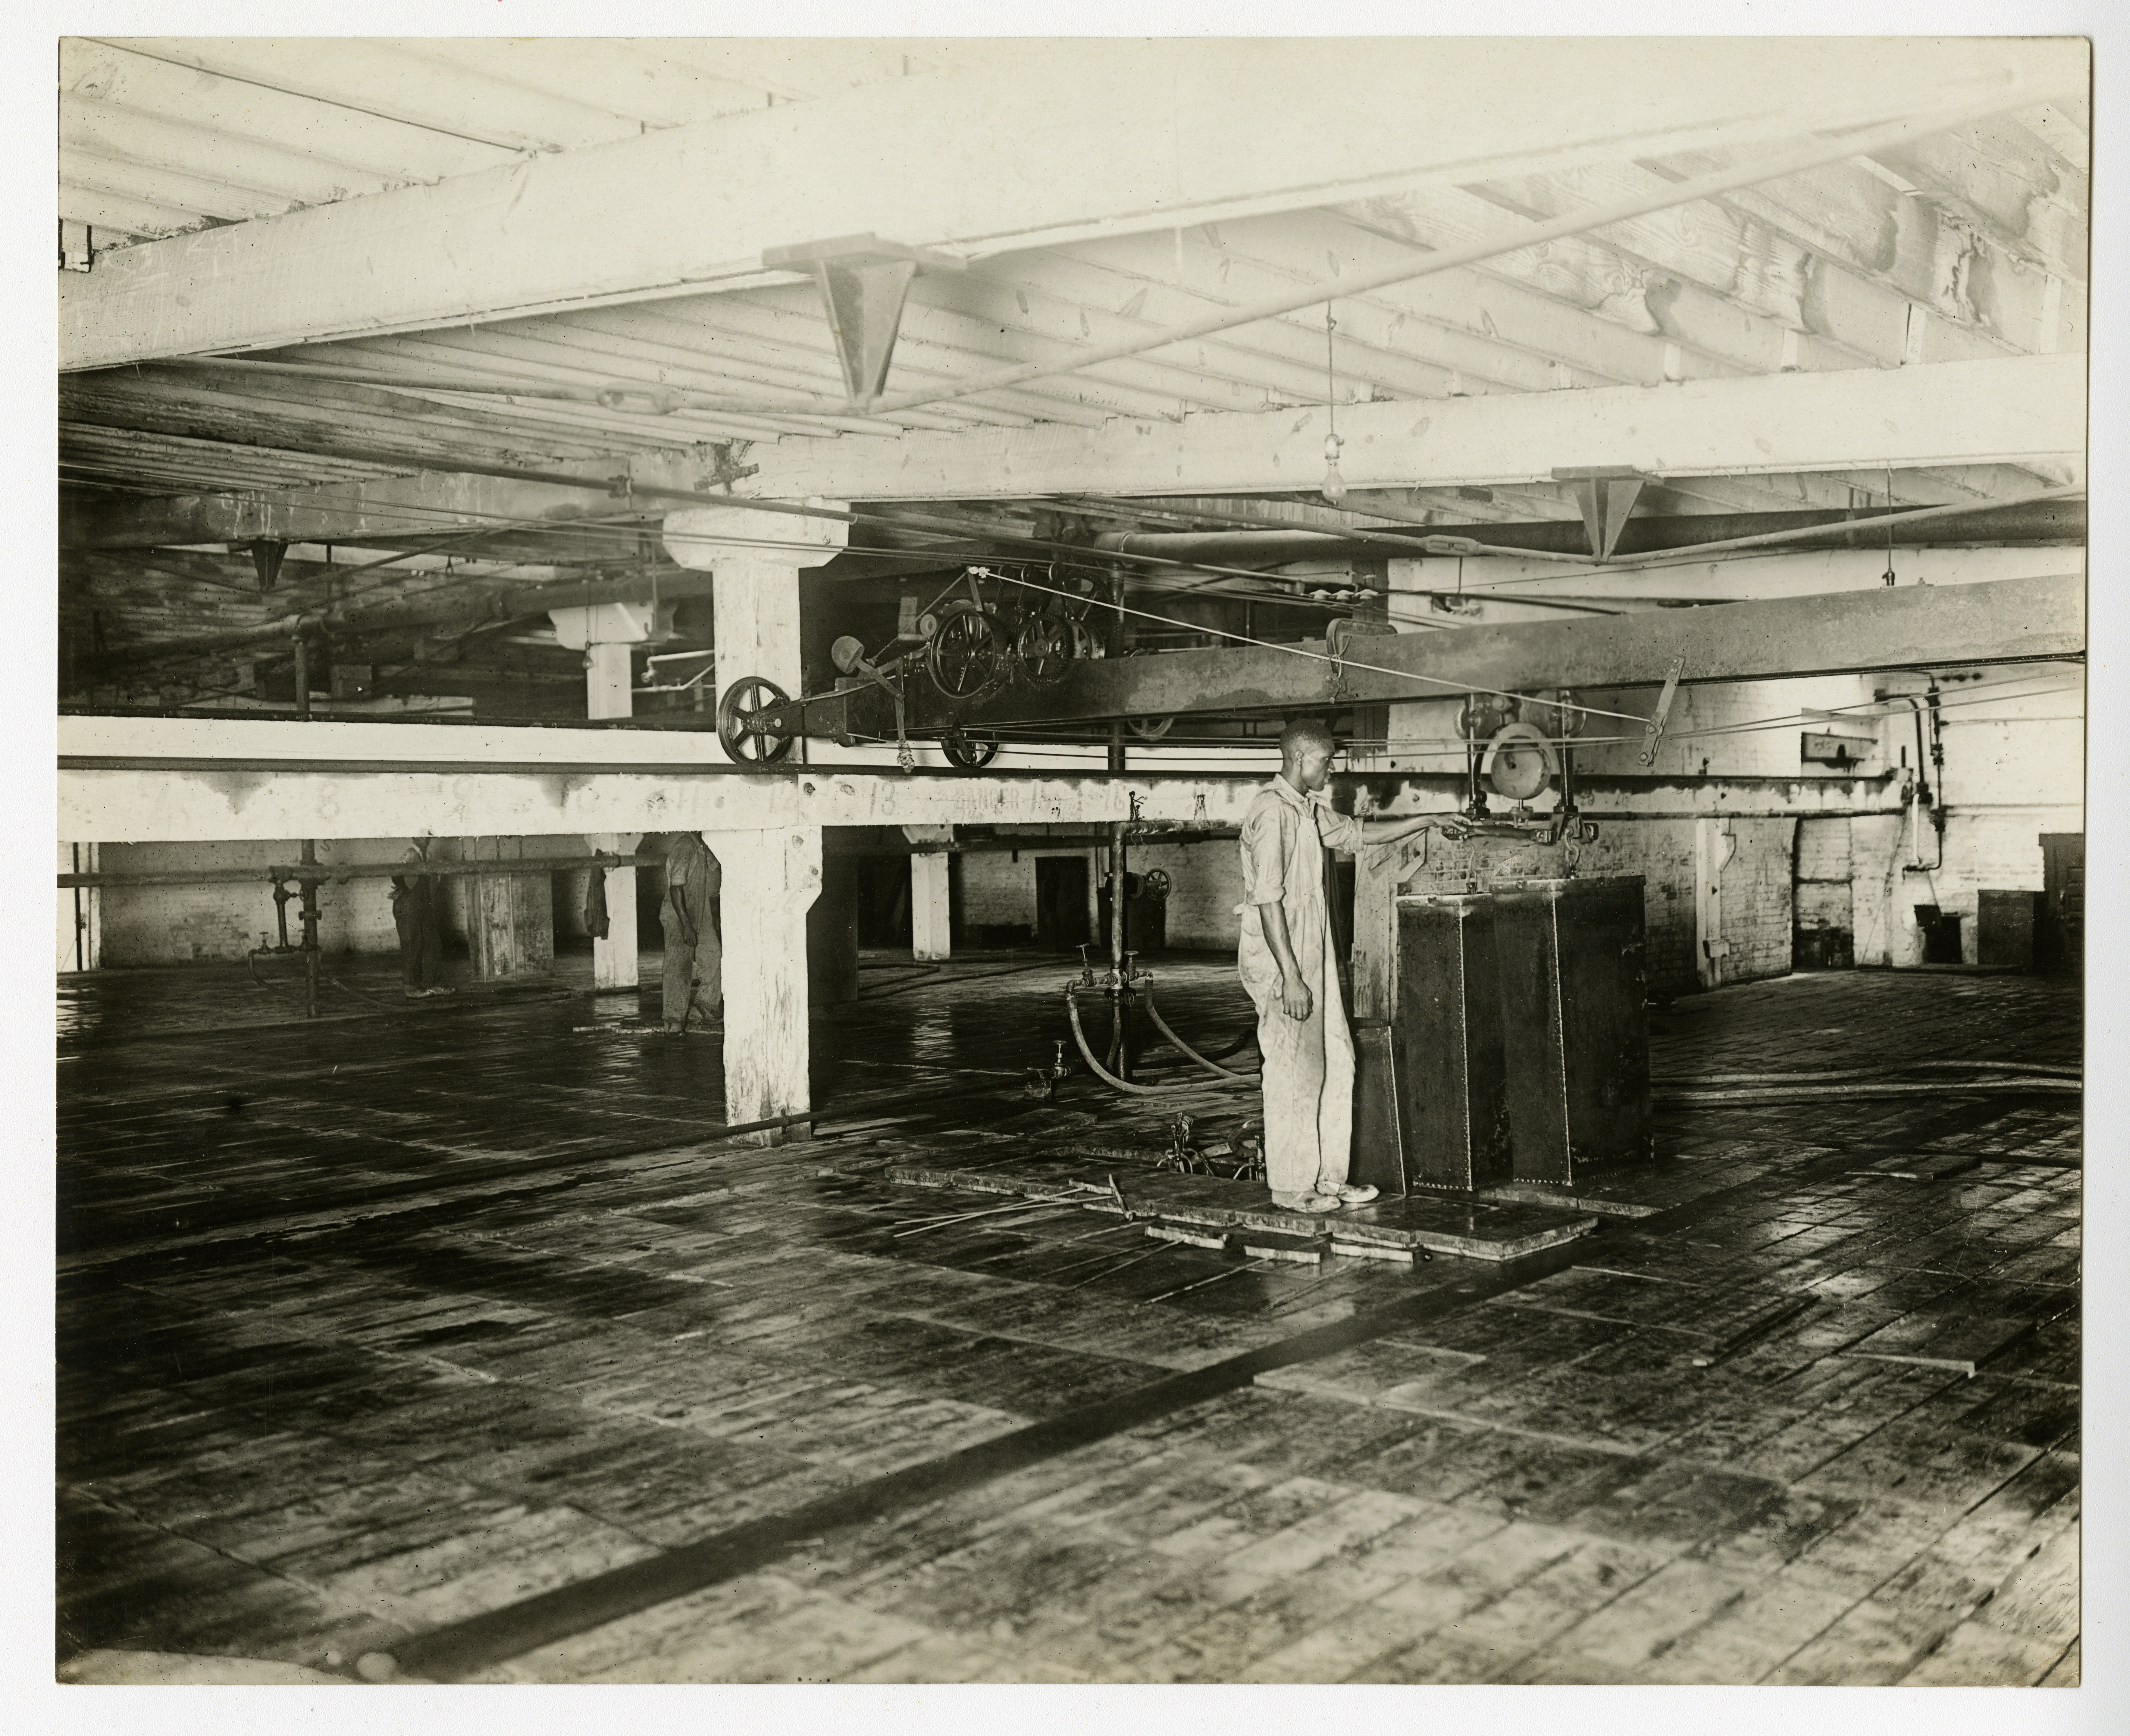  A worker operates the can hoist on the floor of a Frick-built ice plant, undated (AC0293-0000012).